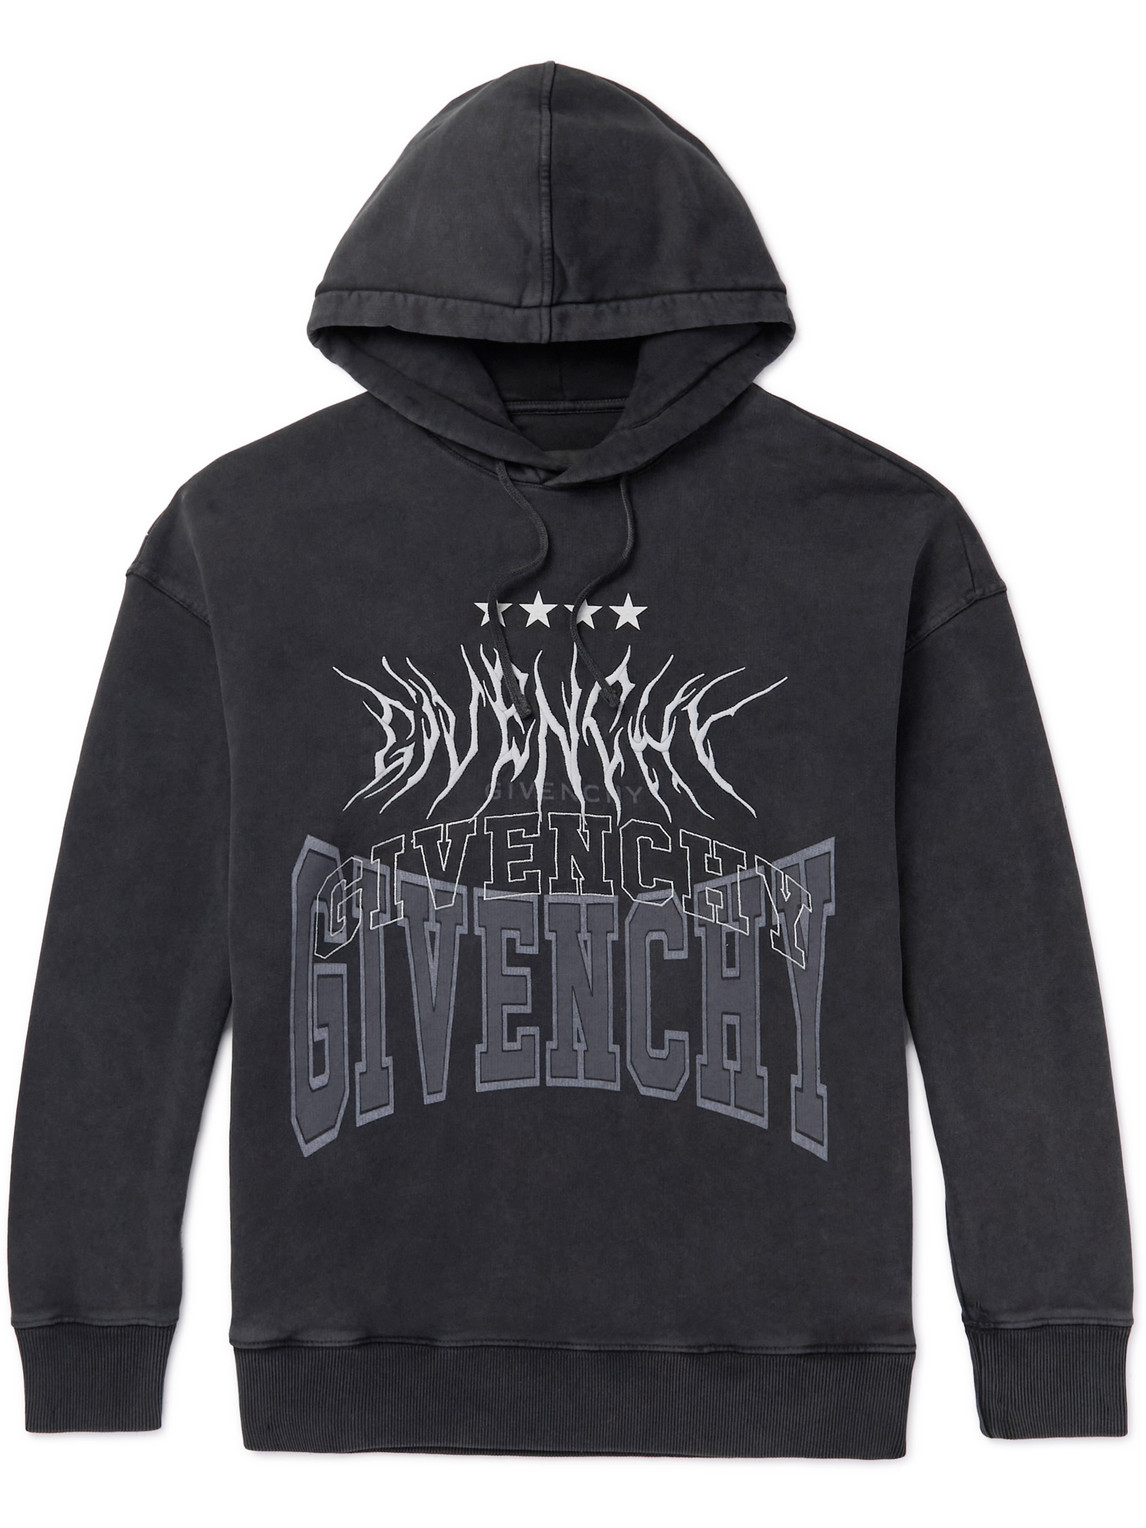 Givenchy - Oversized Logo-Detailed Cotton-Jersey Hoodie - Men - Gray - XS